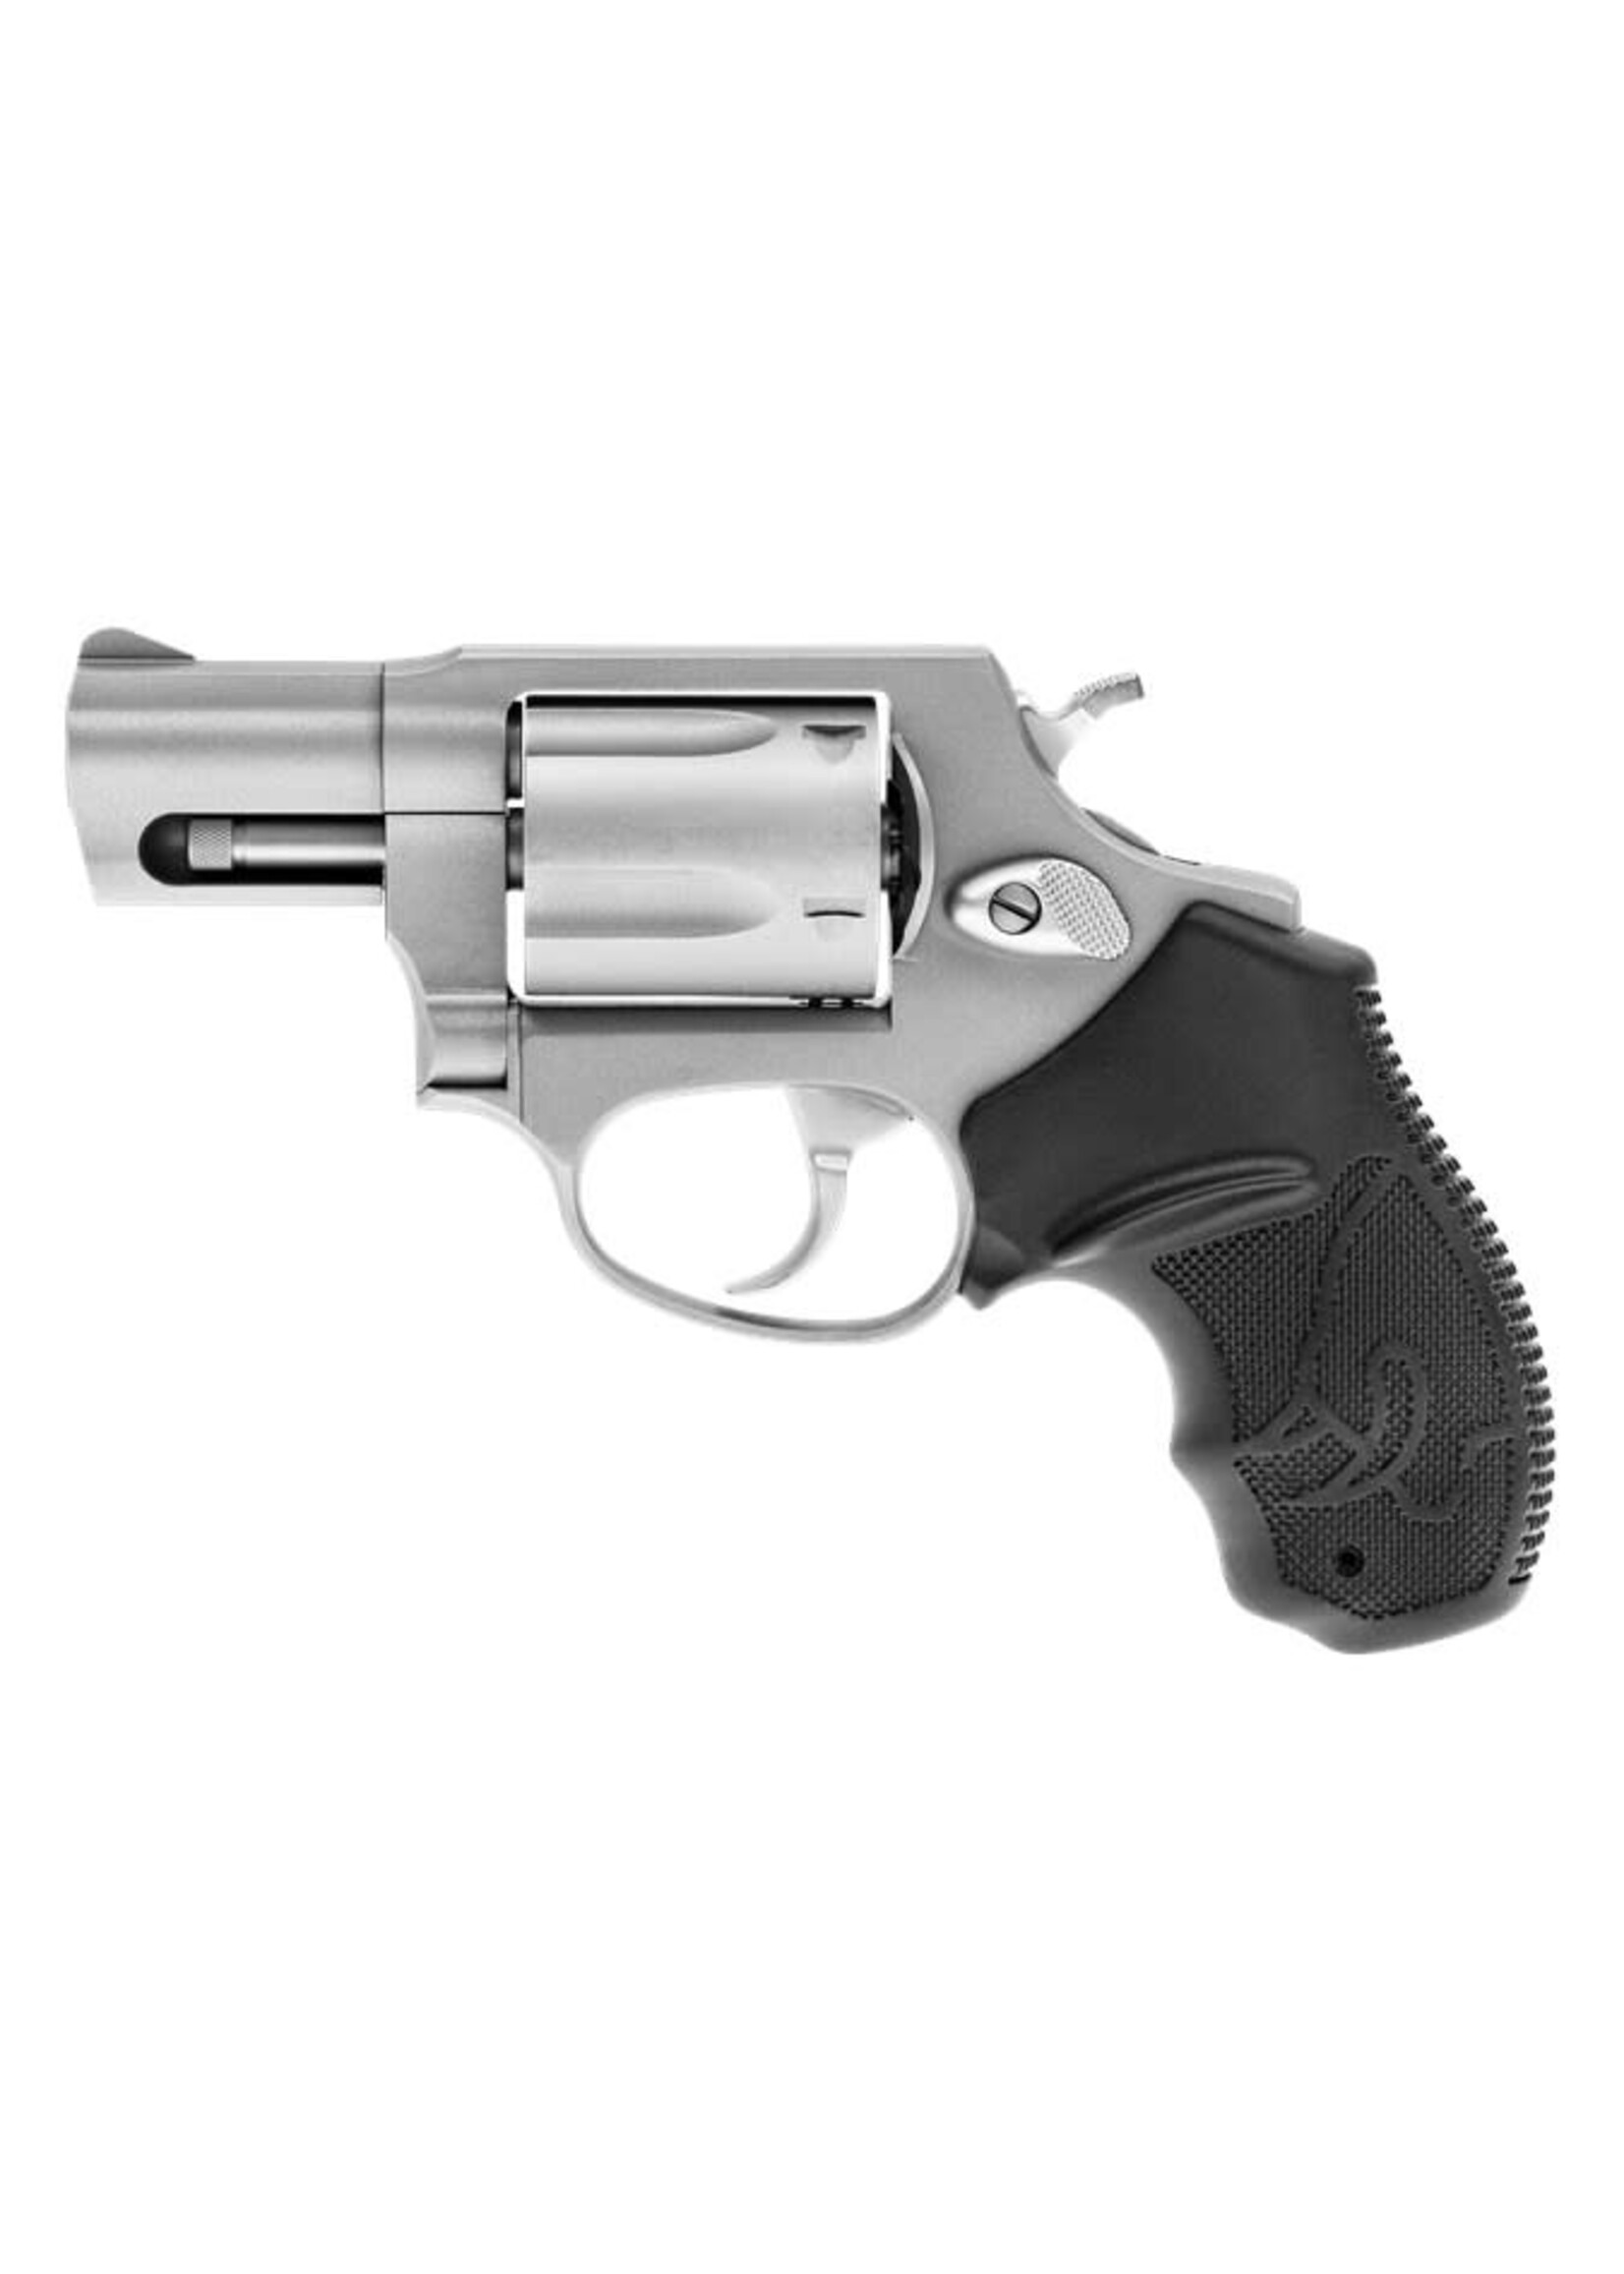 Taurus Taurus, Model 605, Double Action, Metal Frame Revolver, Small Frame, 357 Magnum, 2" Barrel, Stainless Steel, Matte Finish, Silver, Rubber Grips, Fixed Sights, 5 Rounds